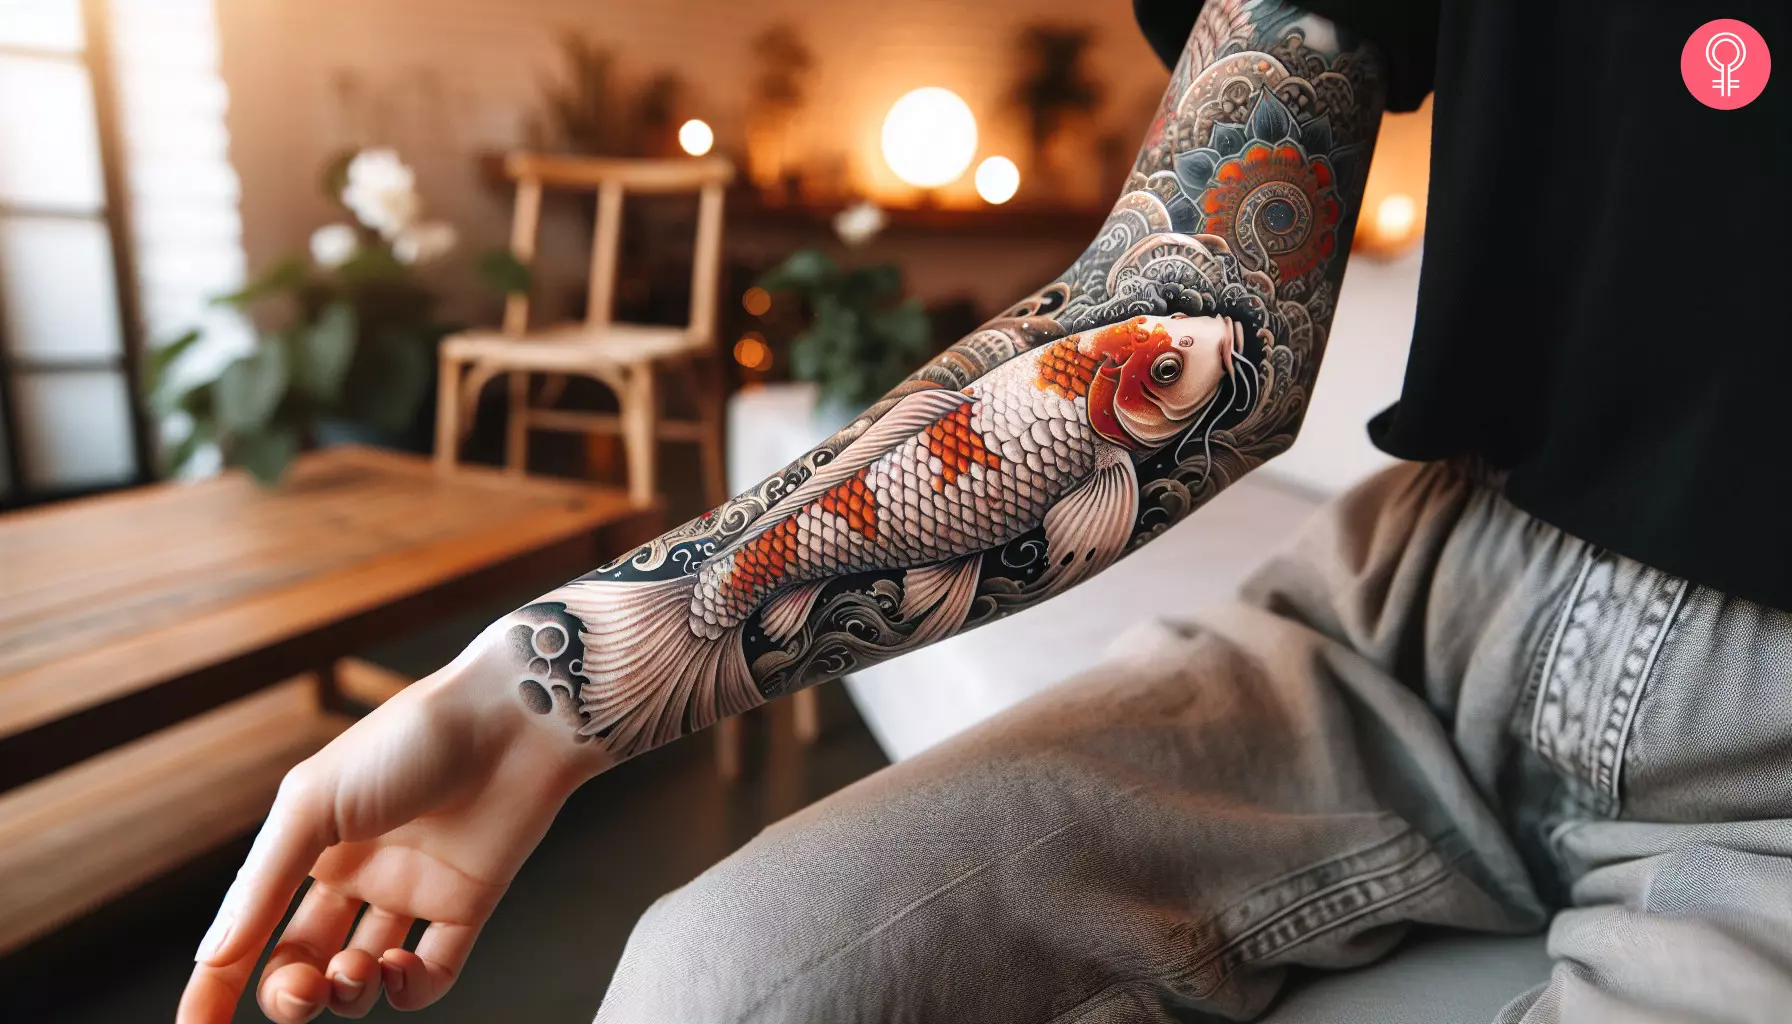 A koi fish tattoo design on the forearm of a woman